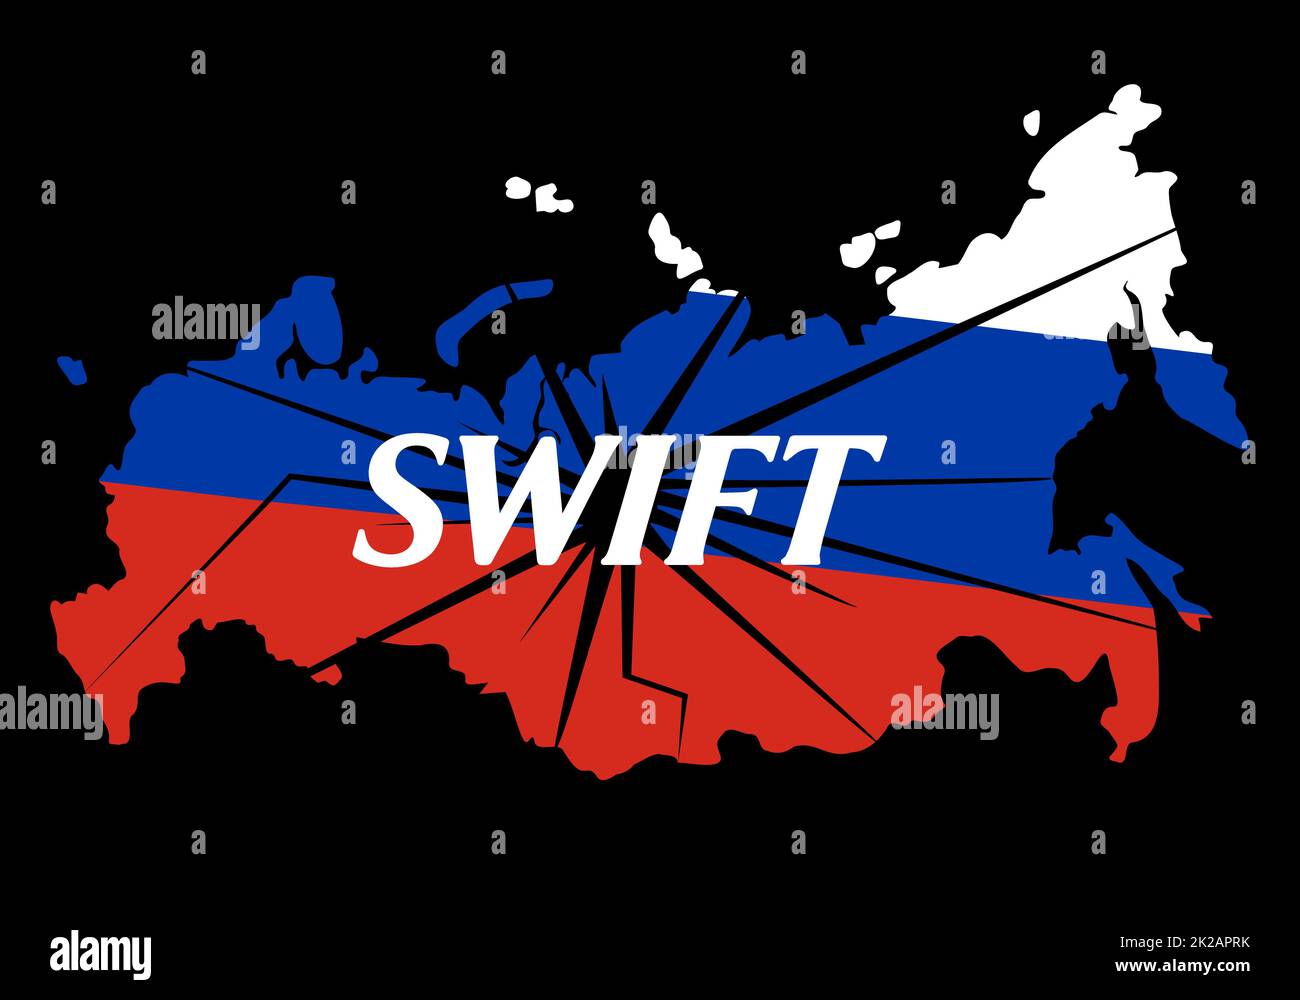 Prohibition of financial transactions in the Swift payment system. Conceptual text with Russian map at background. Sanctions against Russia, and disconnection from SWIFT through war against Ukraine. Stock Photo